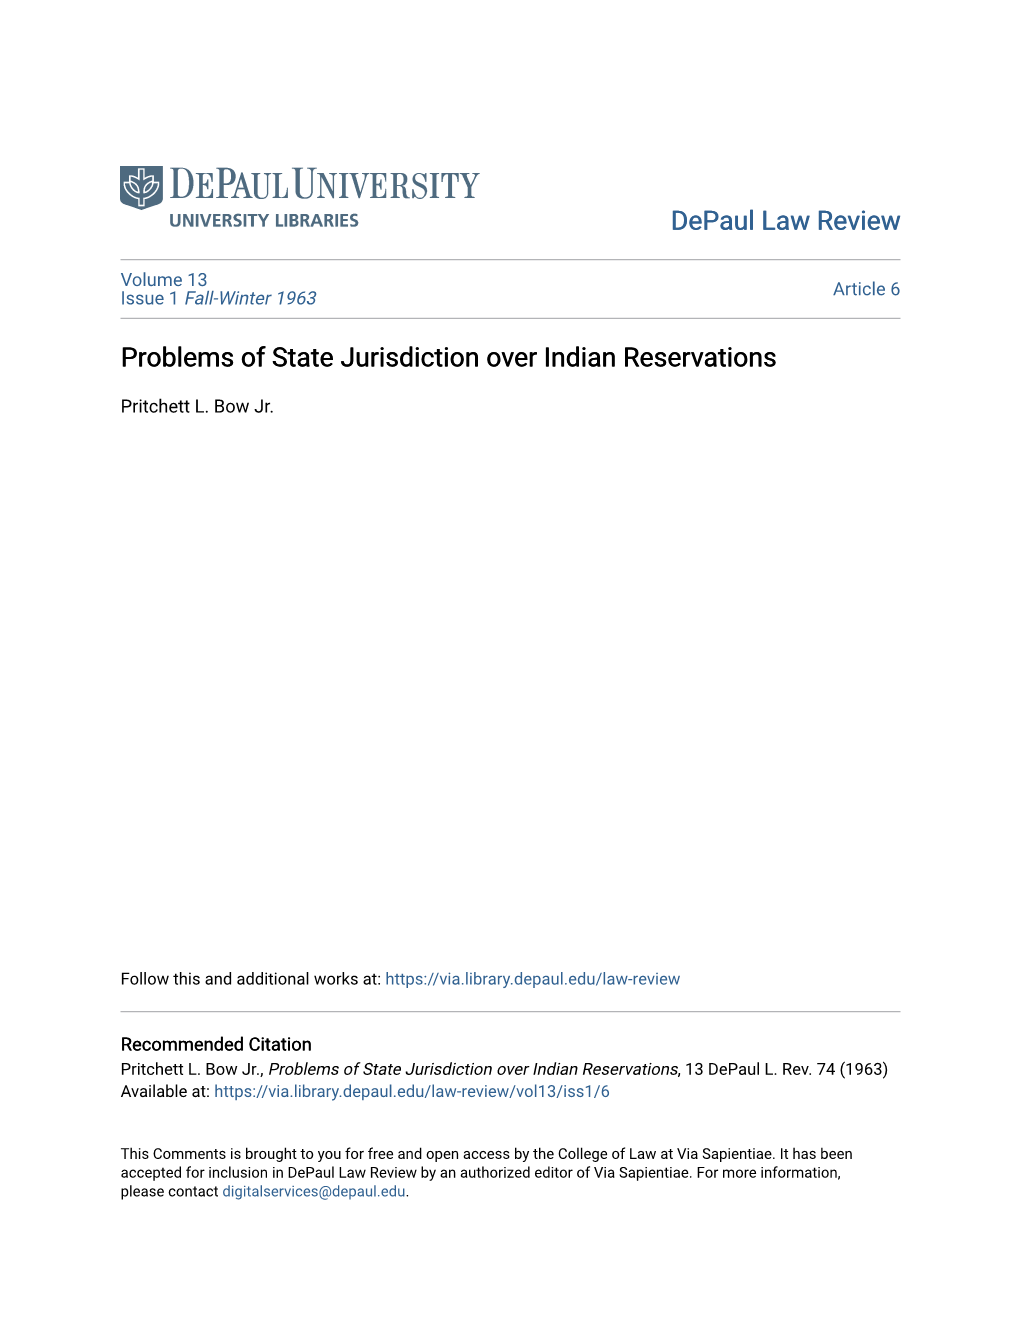 Problems of State Jurisdiction Over Indian Reservations